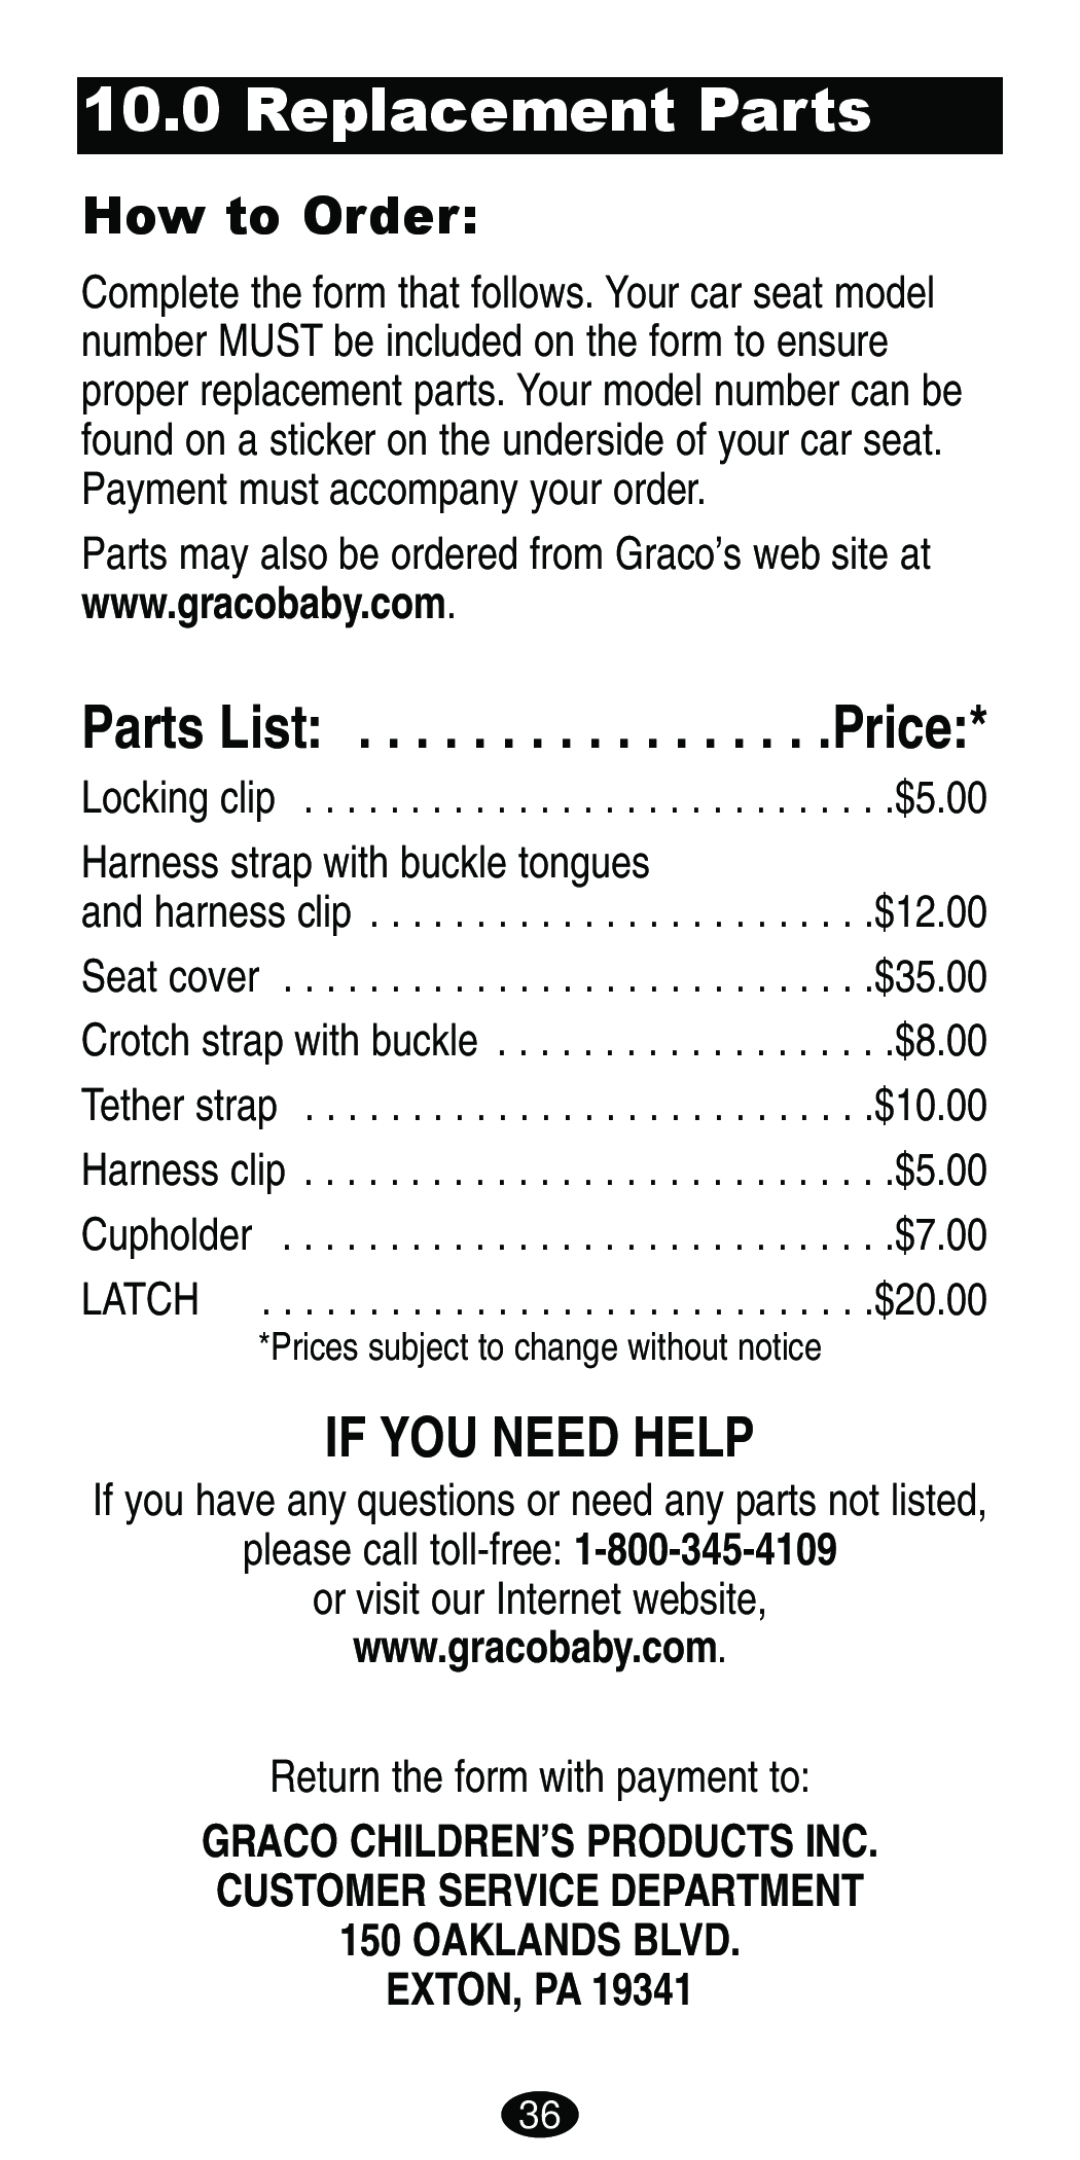 Graco Car Seat/Booster Replacement Parts, Parts List . . . . . . . . . . . . . . . . .Price, If You Need Help, Exton, Pa 